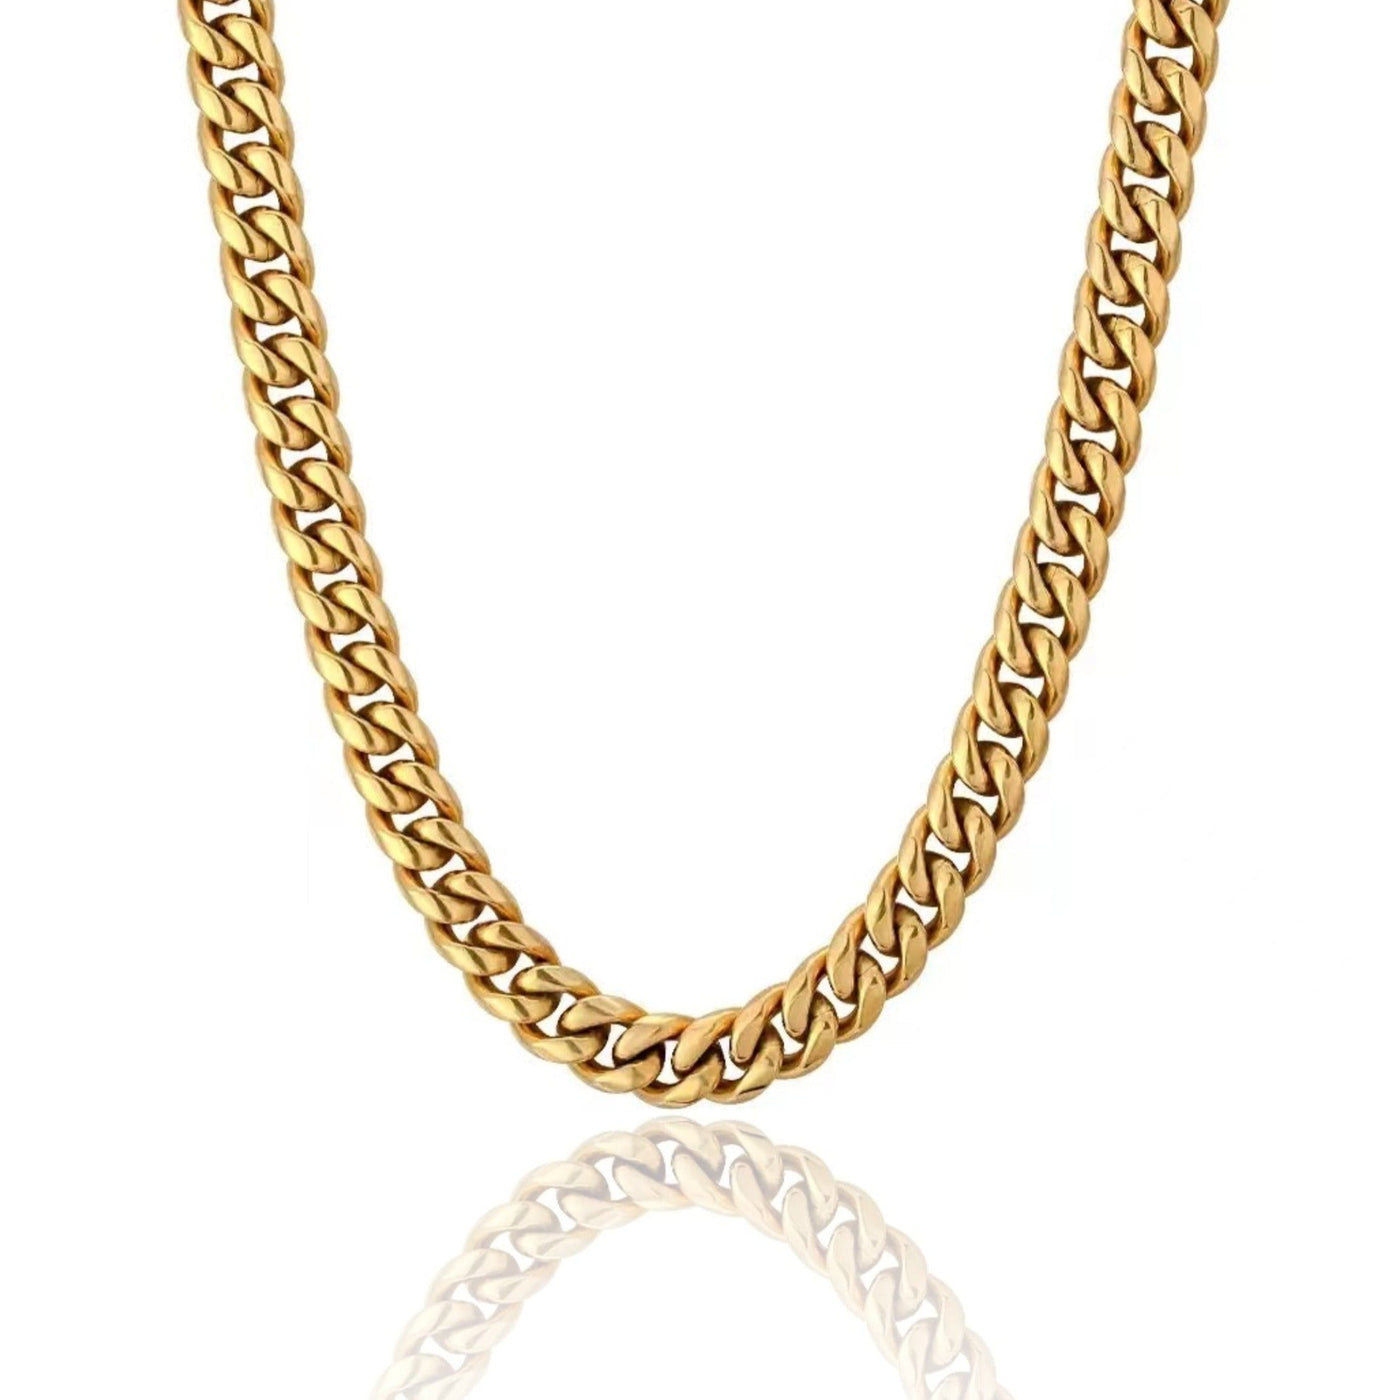 The Golden Age® - 8mm Miami Cuban Link Chain 18K Gold Plated Necklaces 